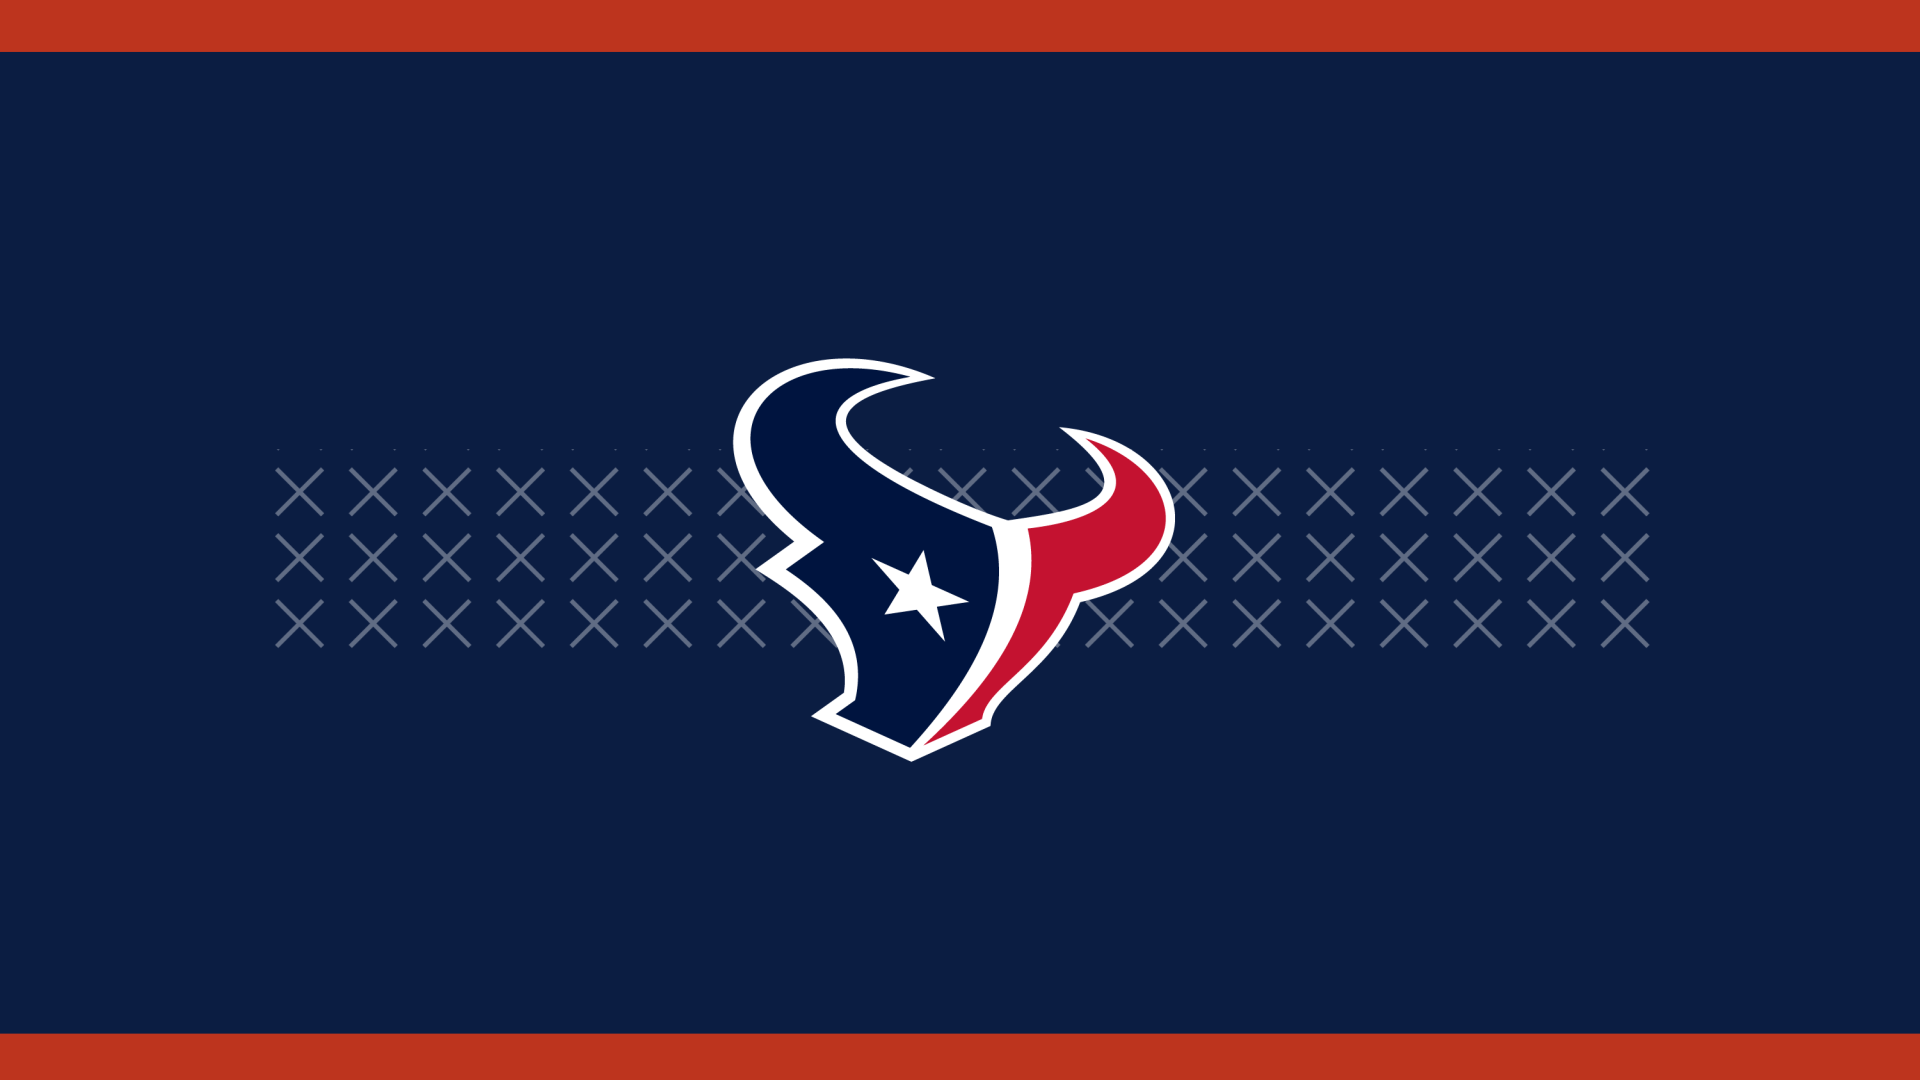 Texans No. 28 in NFL.com power rankings